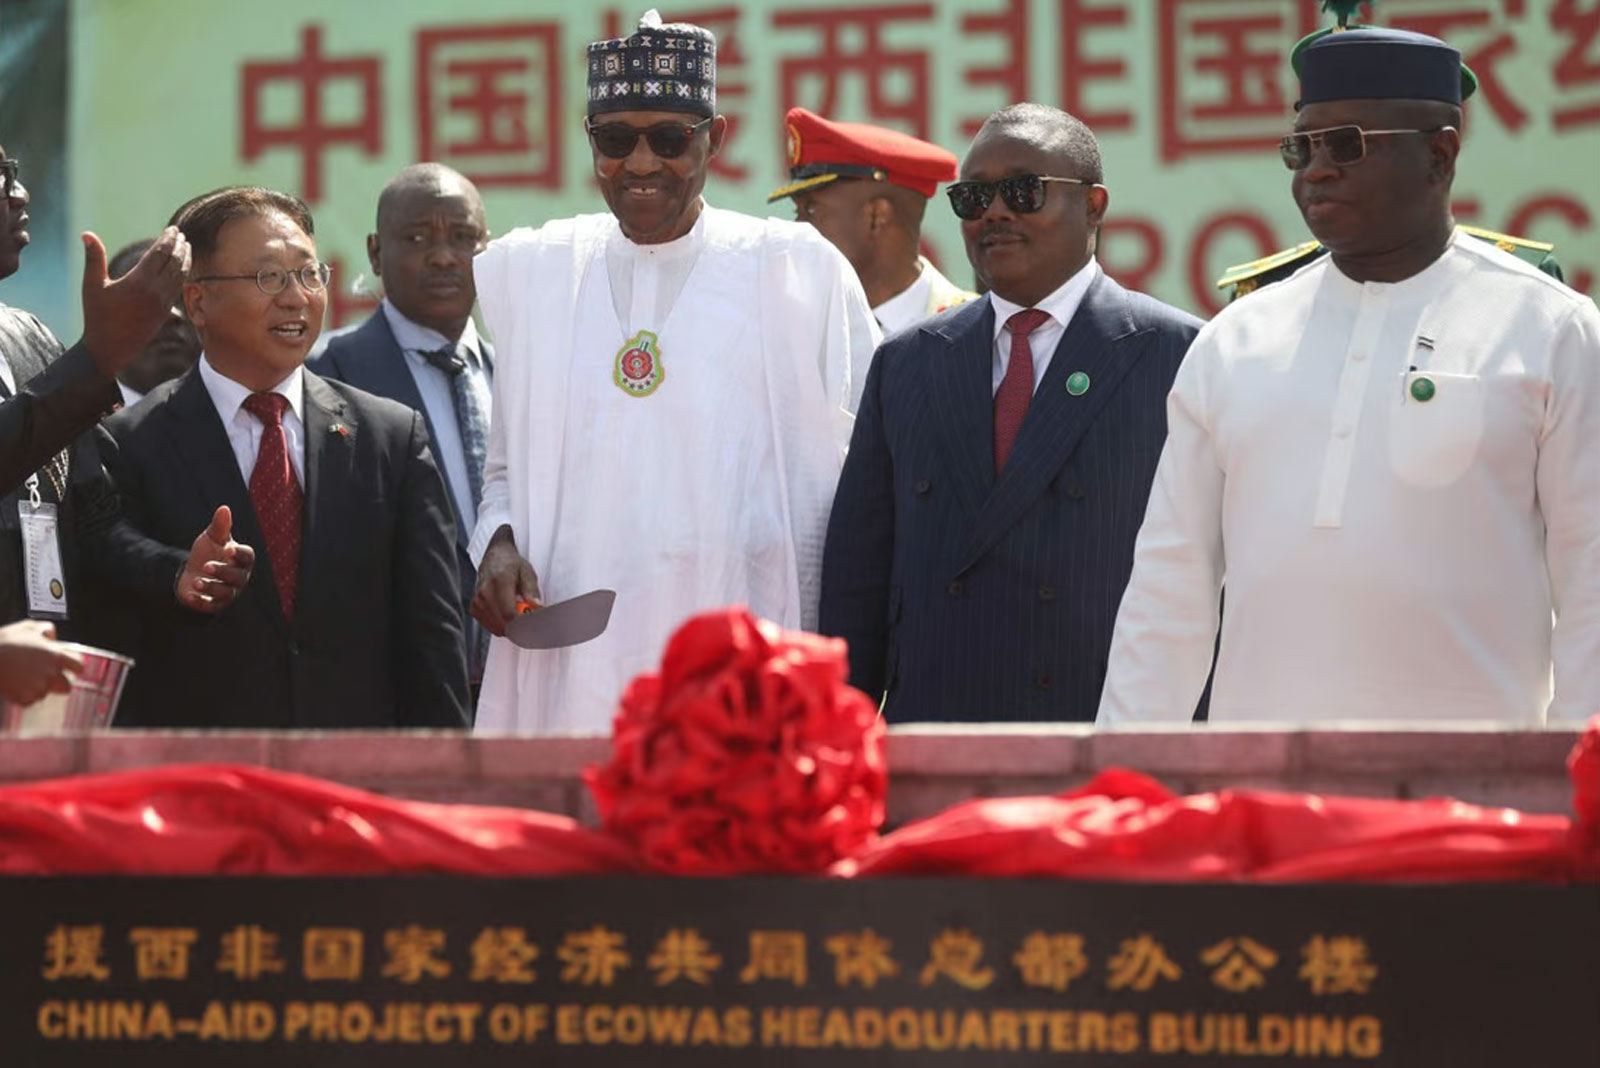 The new headquarters for the West African regional bloc is Beijing’s latest multimillion dollar “gift” in decades of diplomatic outreach.